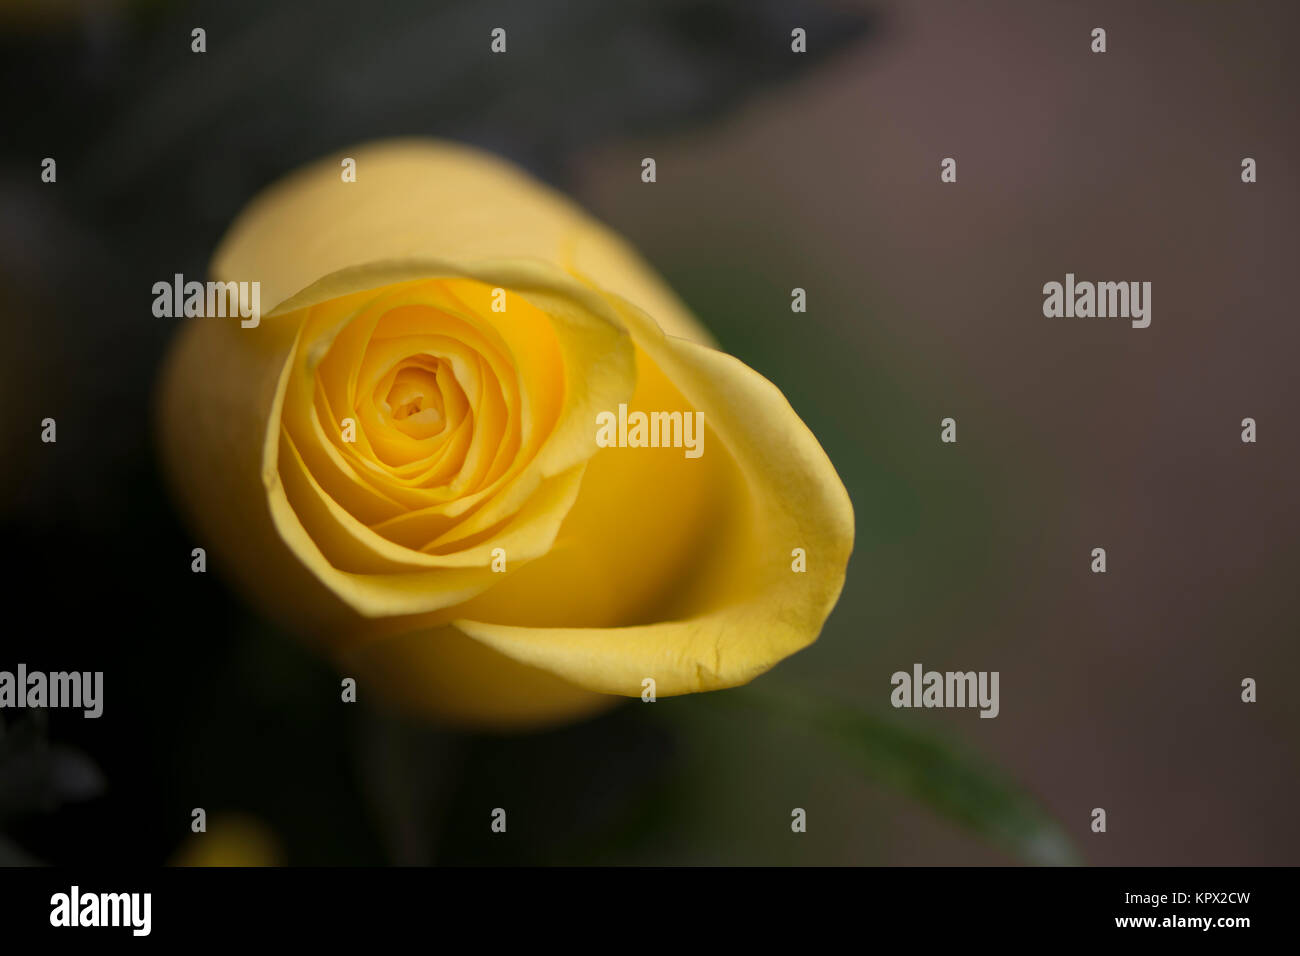 A single isolated yellow rose bud, against a mottled blurred, but natural background. Very shallow focus and depth used on the centre heart and petal  Stock Photo